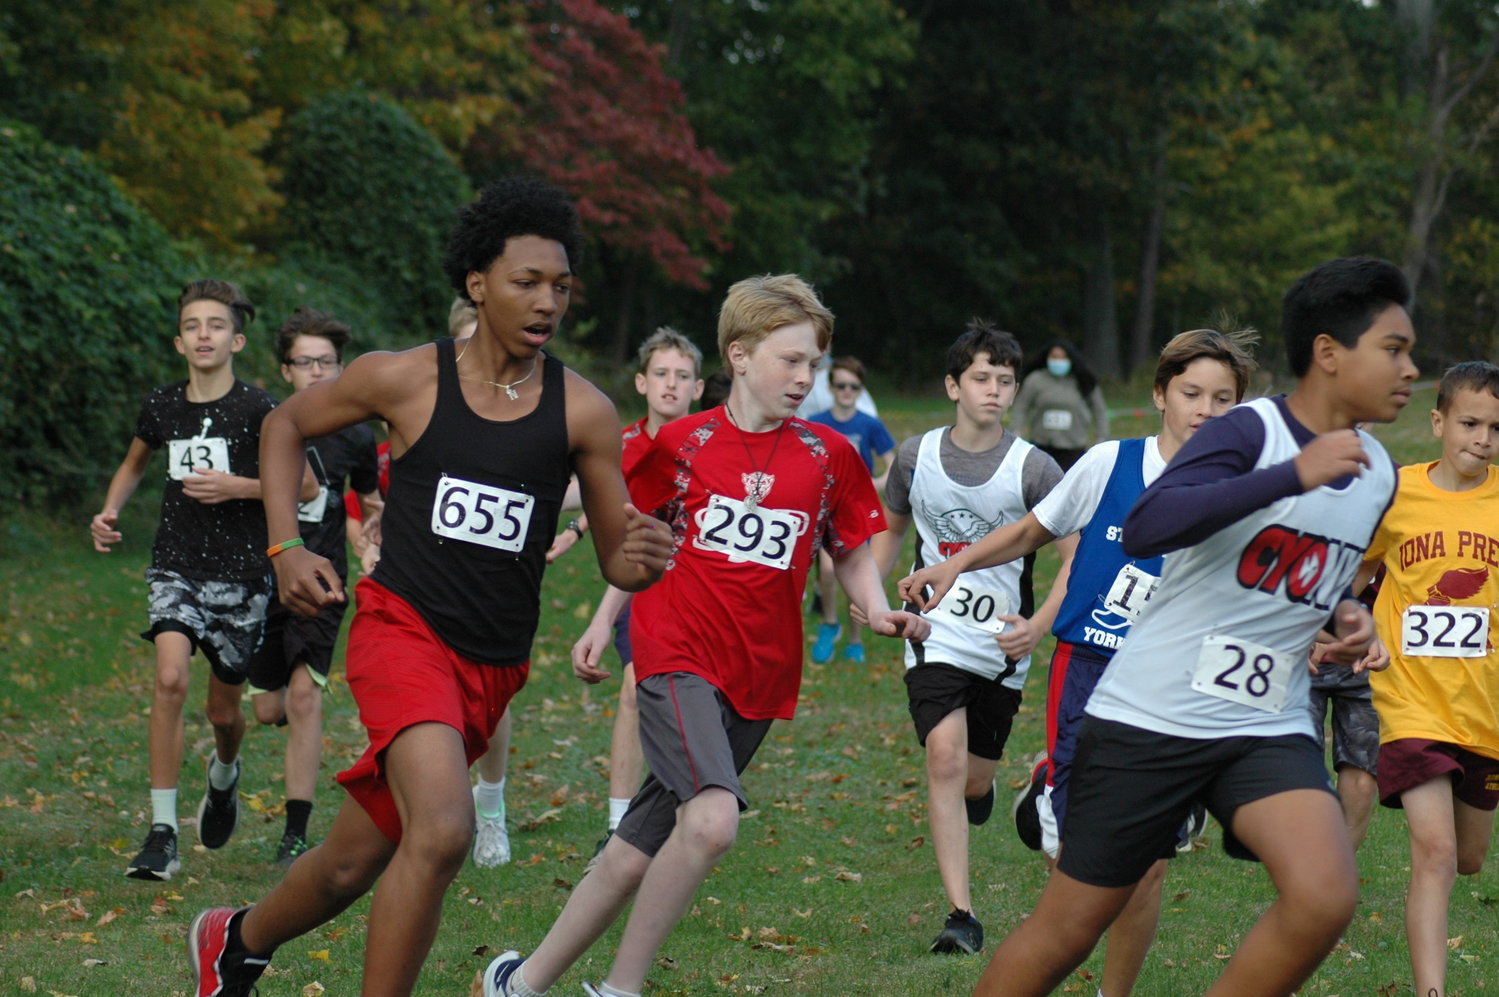 CYO runners compete in a cross country race at St. Augustine's in Ossining Oct. 17.